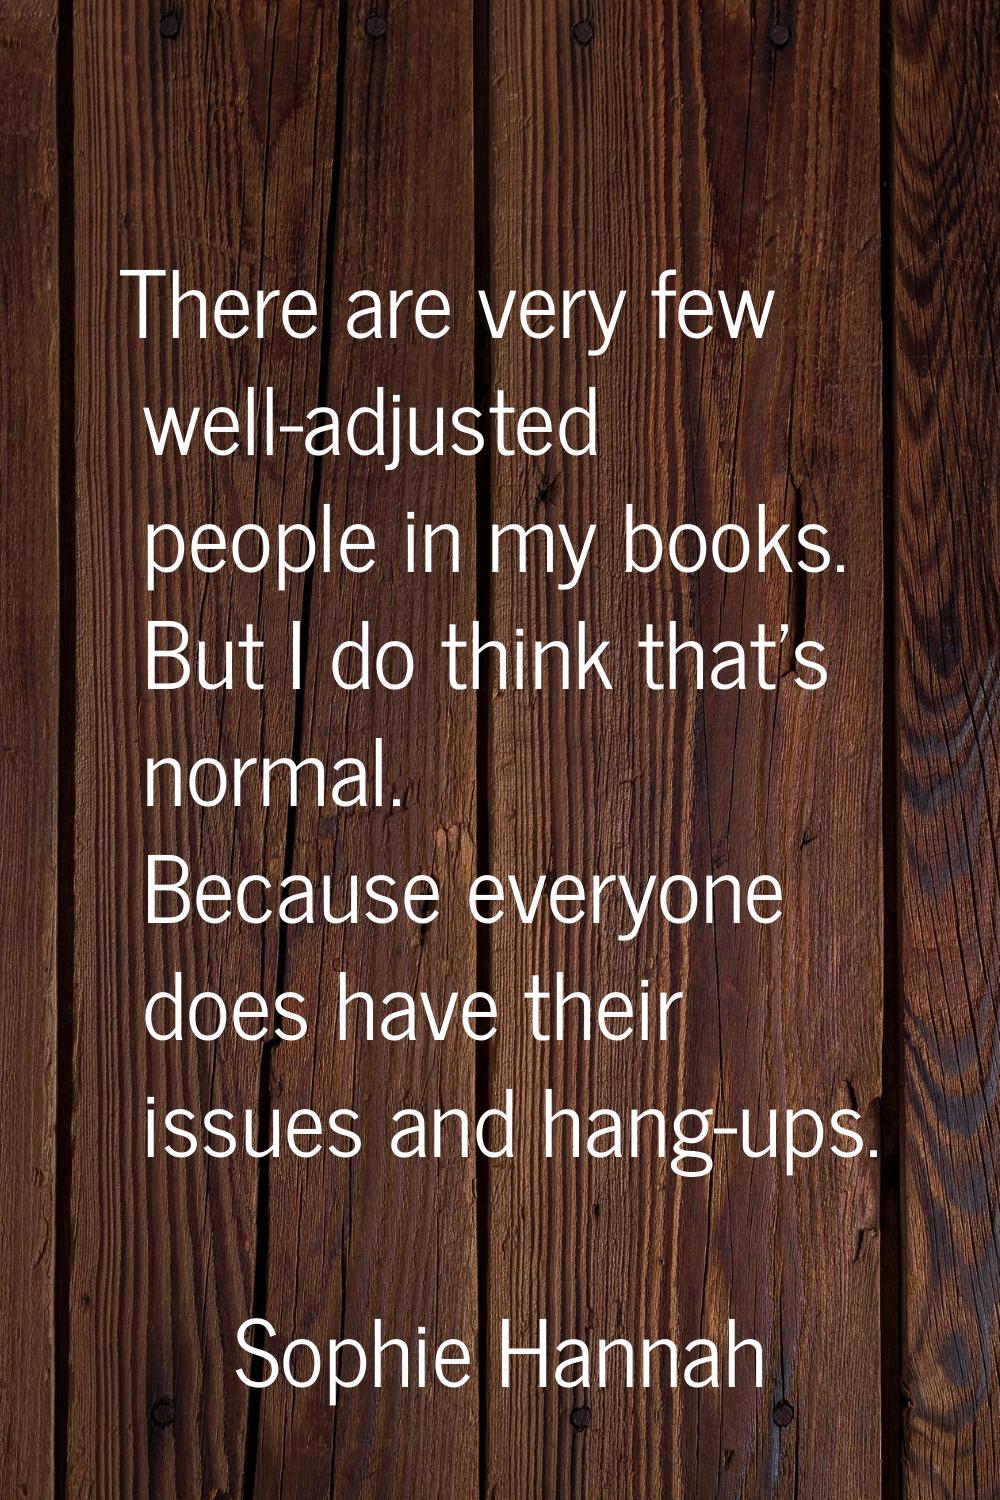 There are very few well-adjusted people in my books. But I do think that's normal. Because everyone